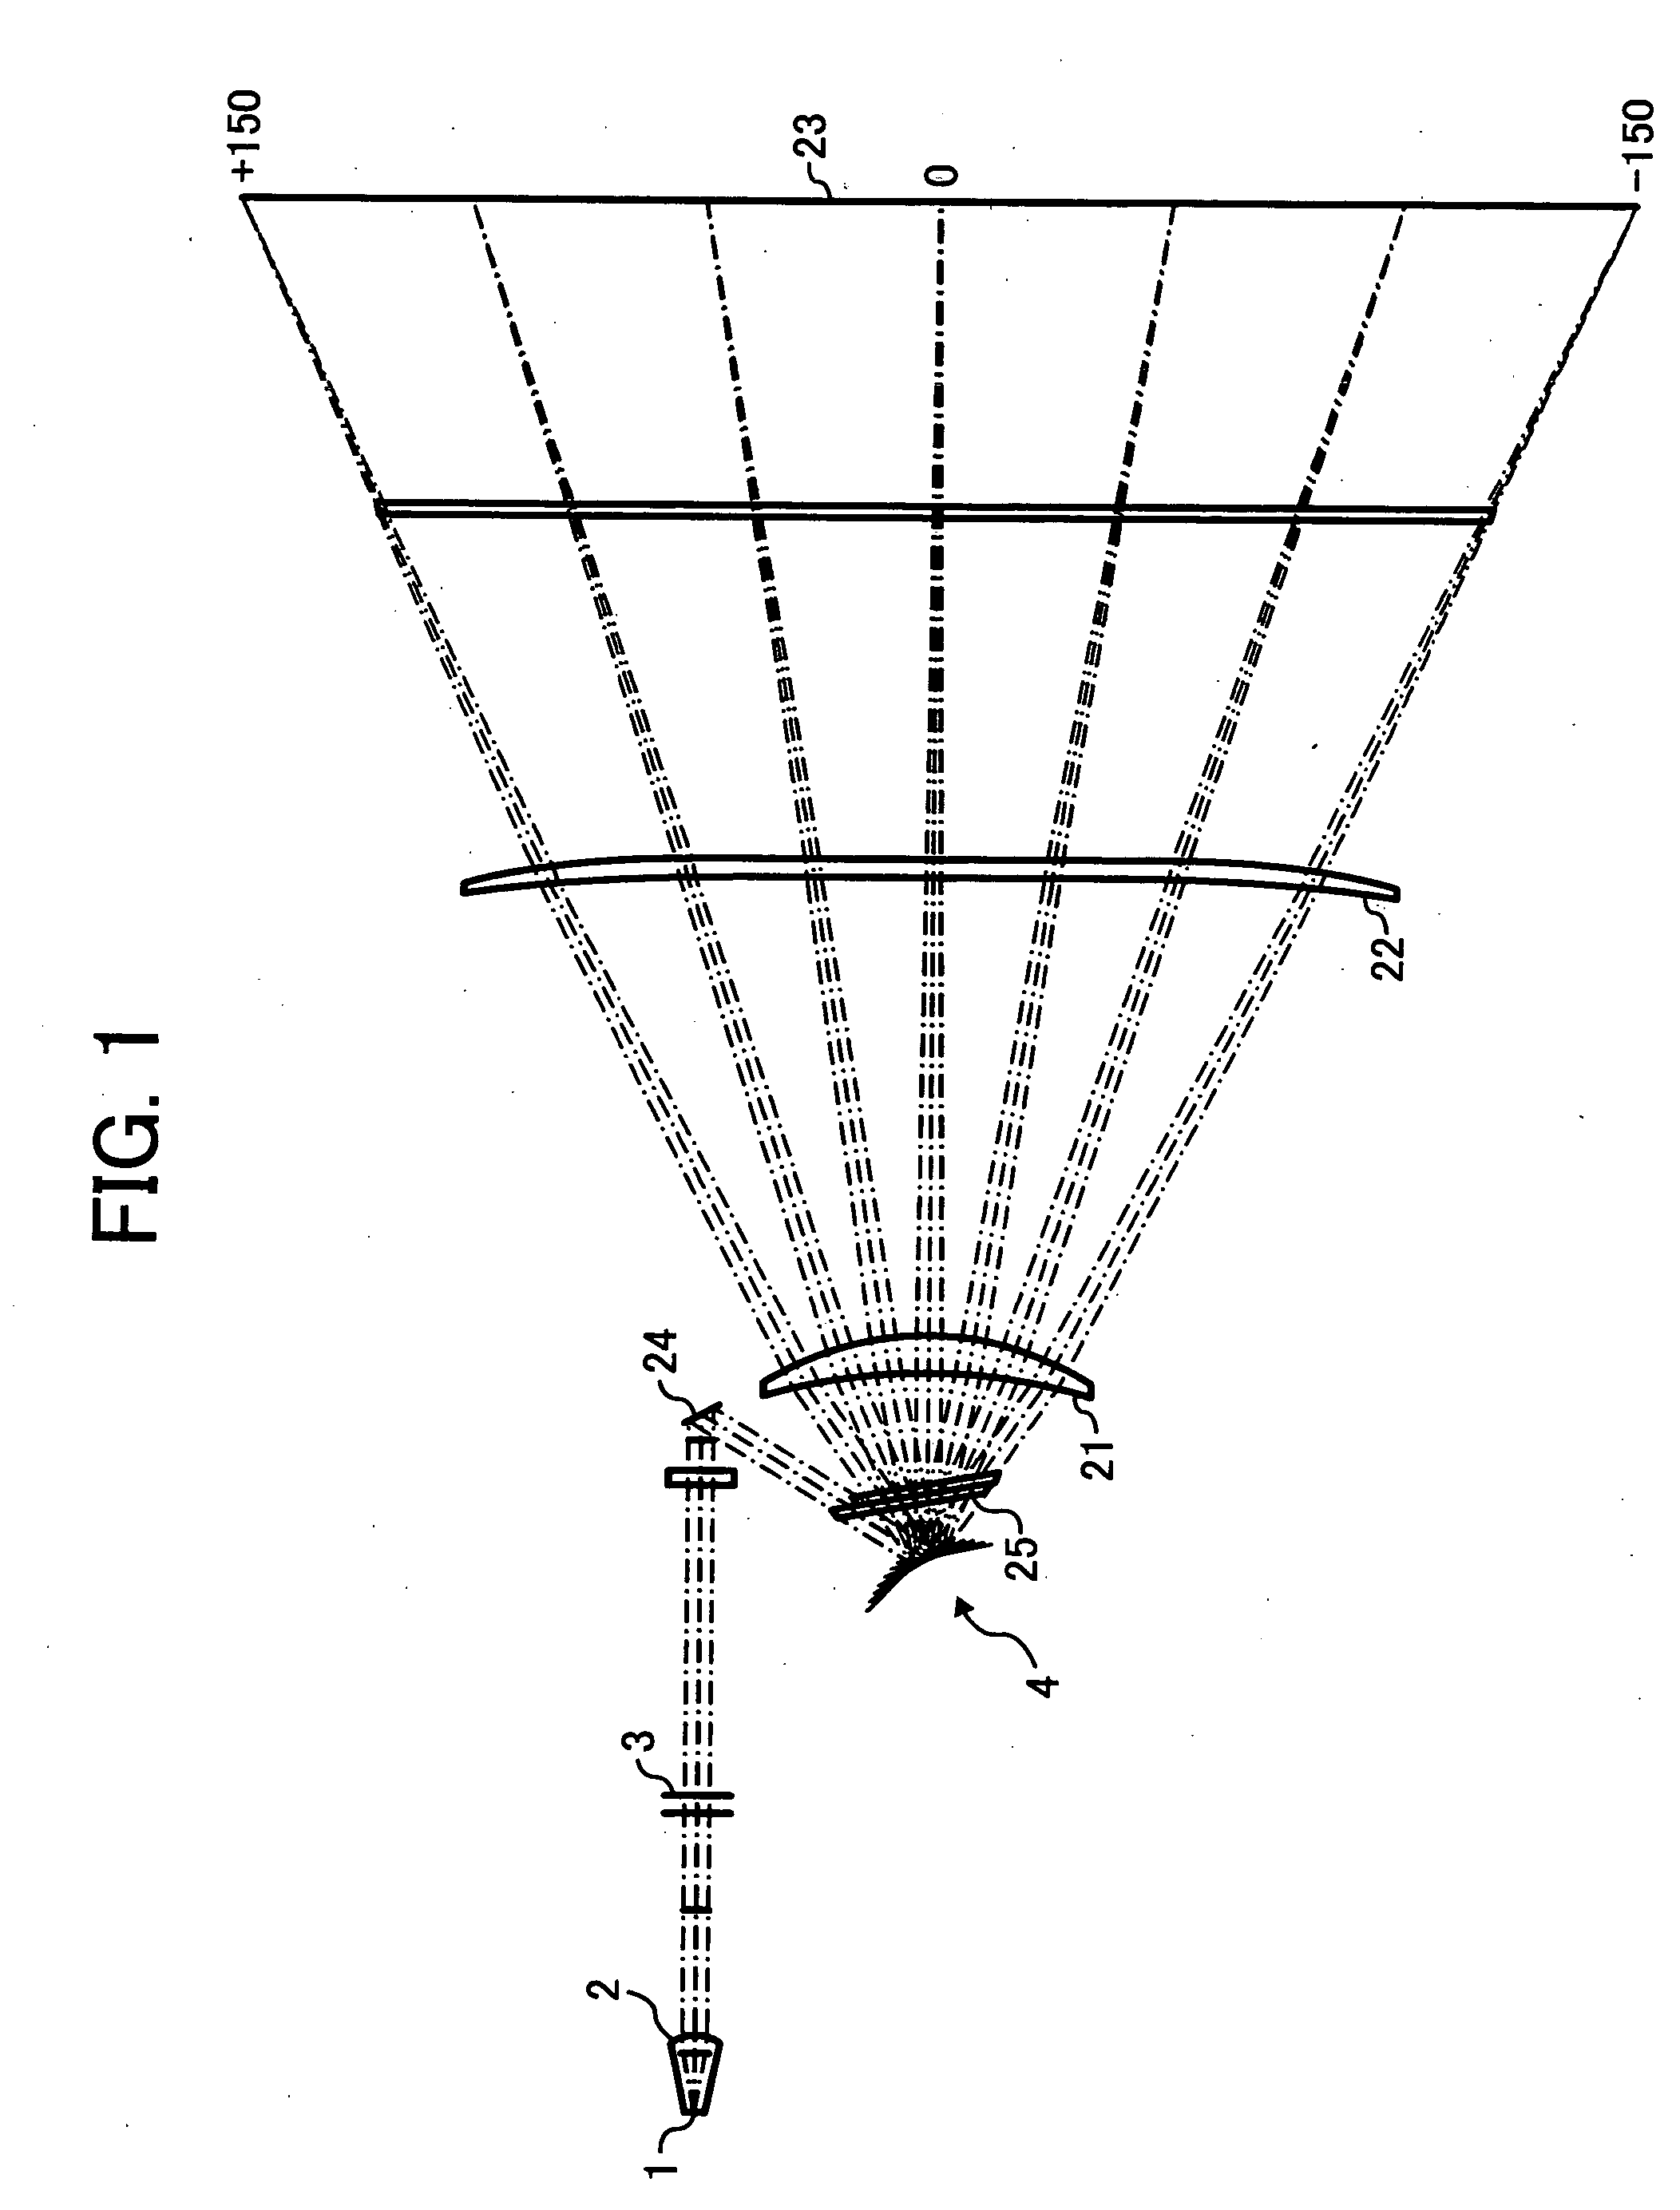 Optical scanner and image forming apparatus